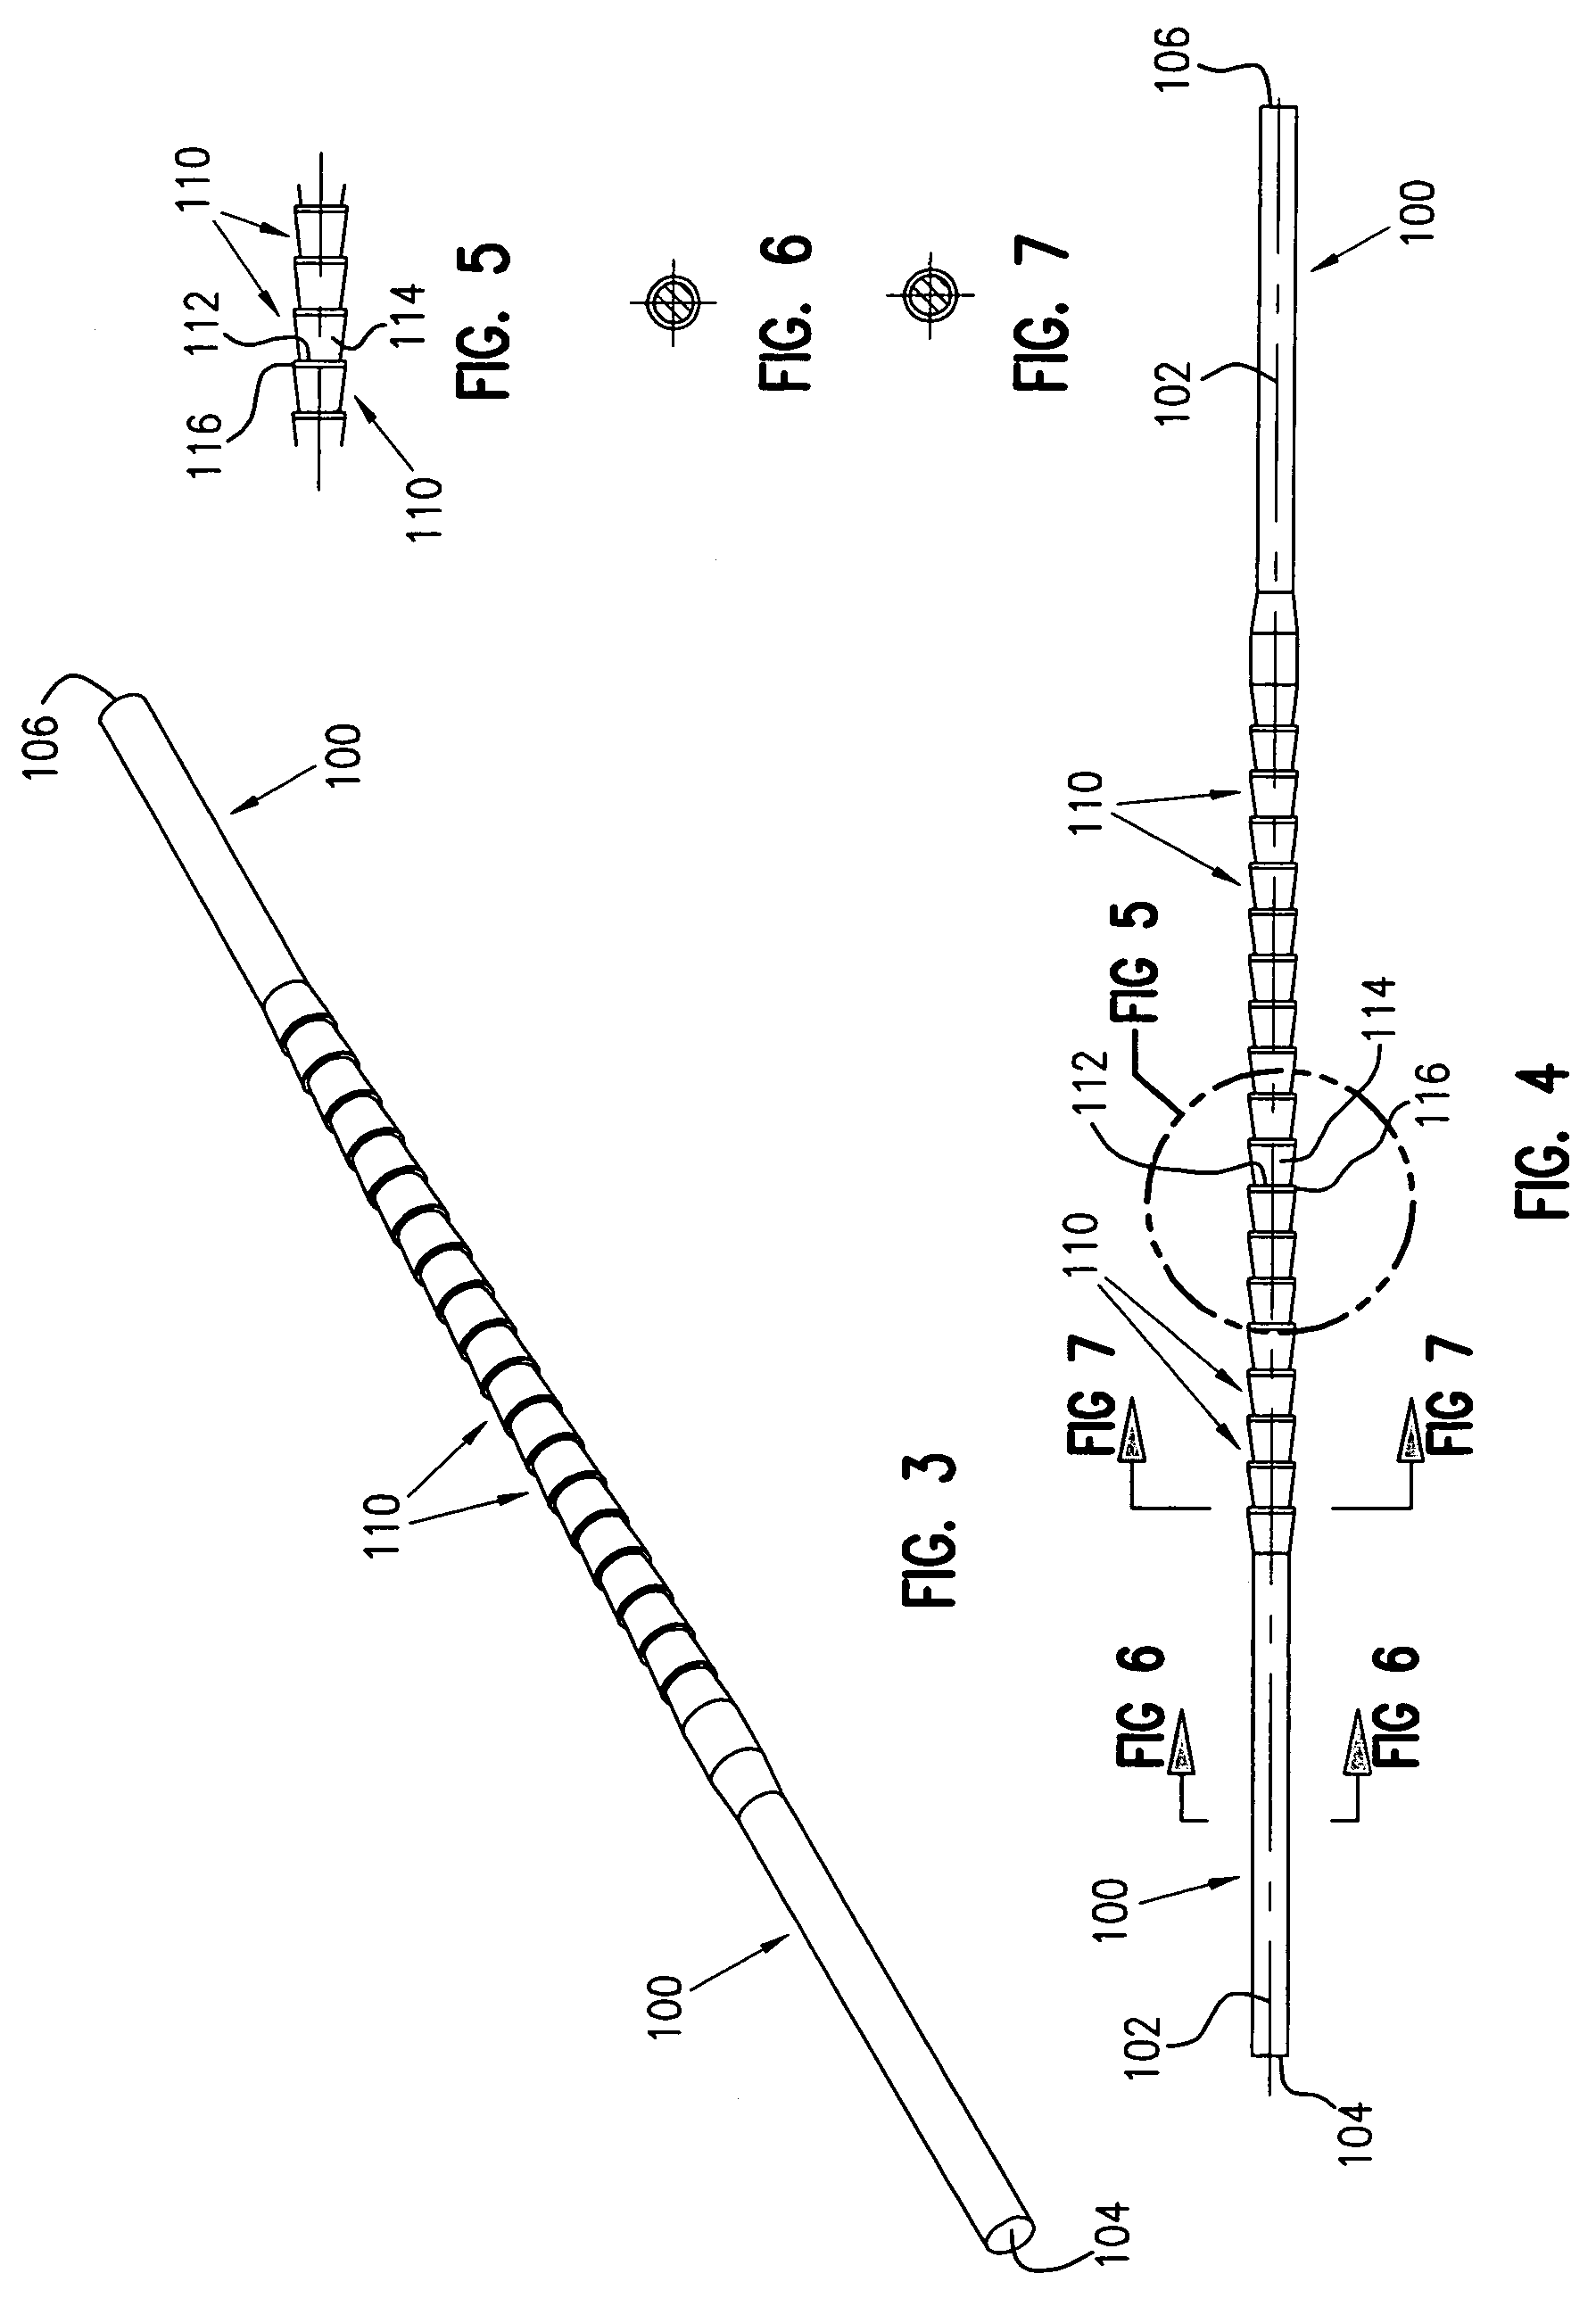 Self-locking power component for orthodontic appliances